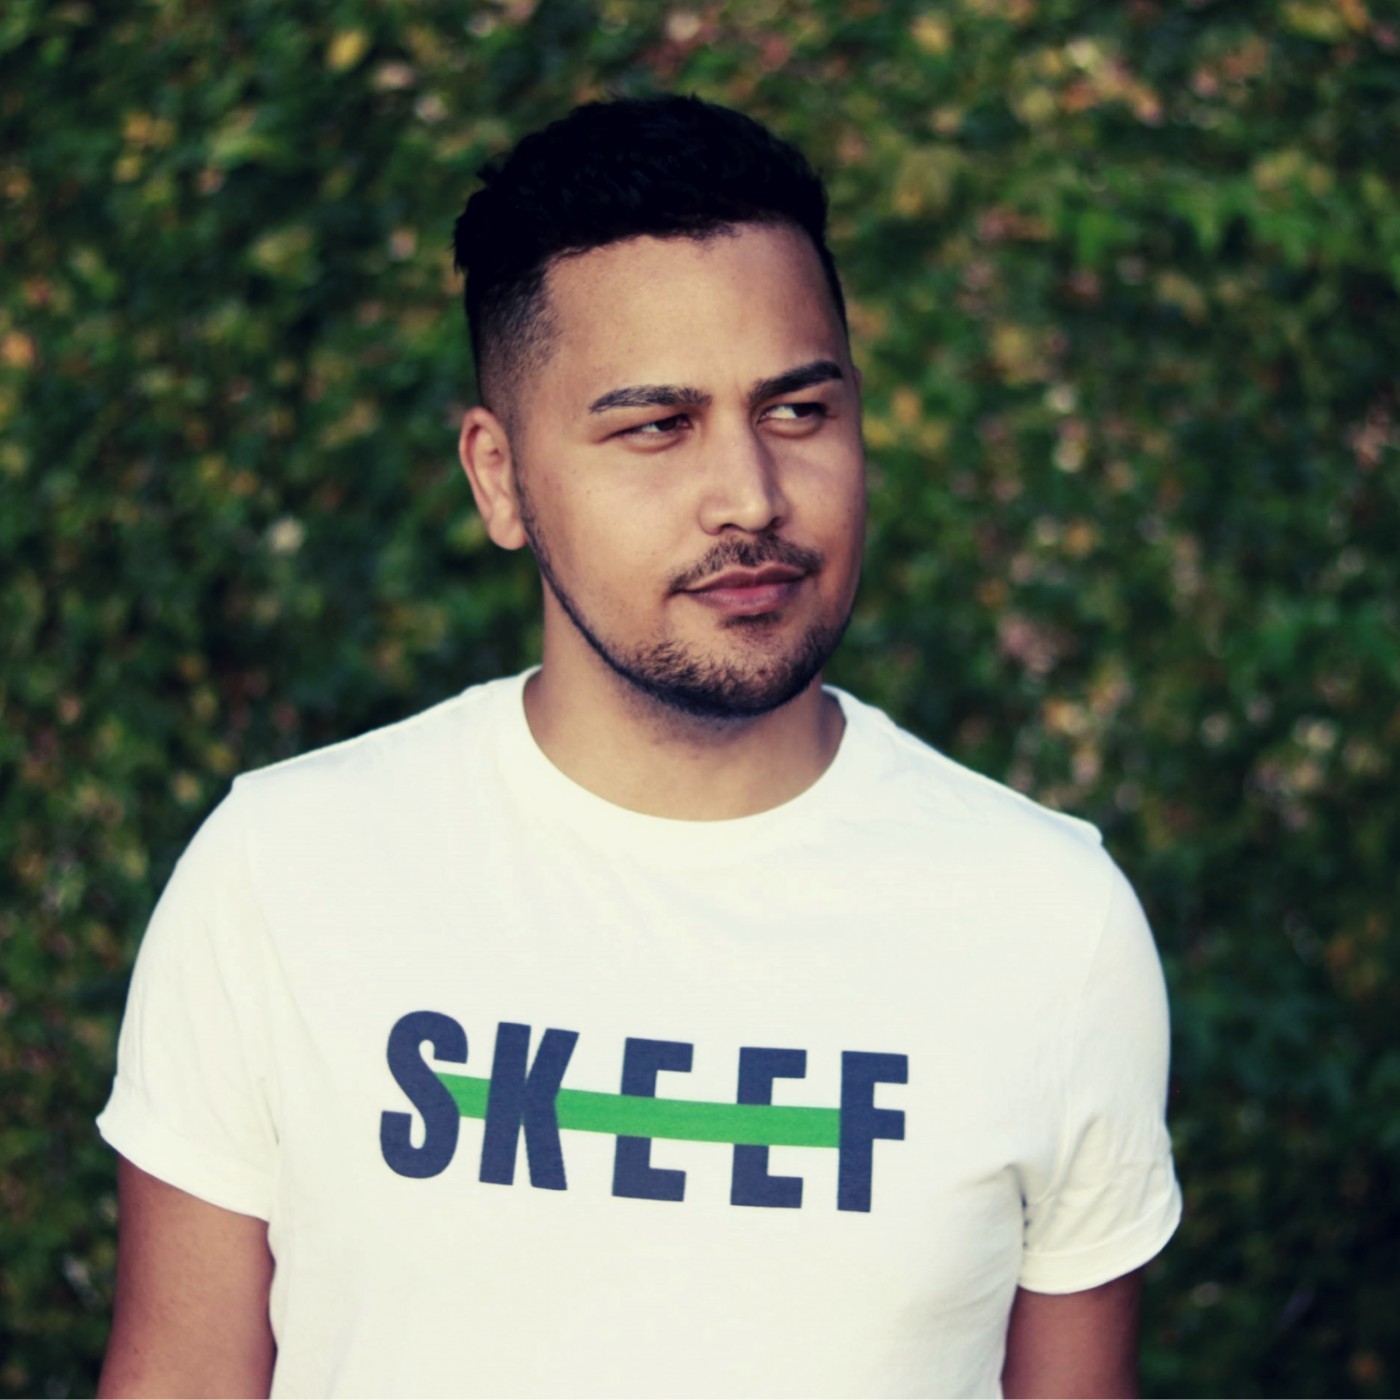 SKEEF: Harsh realities of being gay in SA highlighted in new doccie